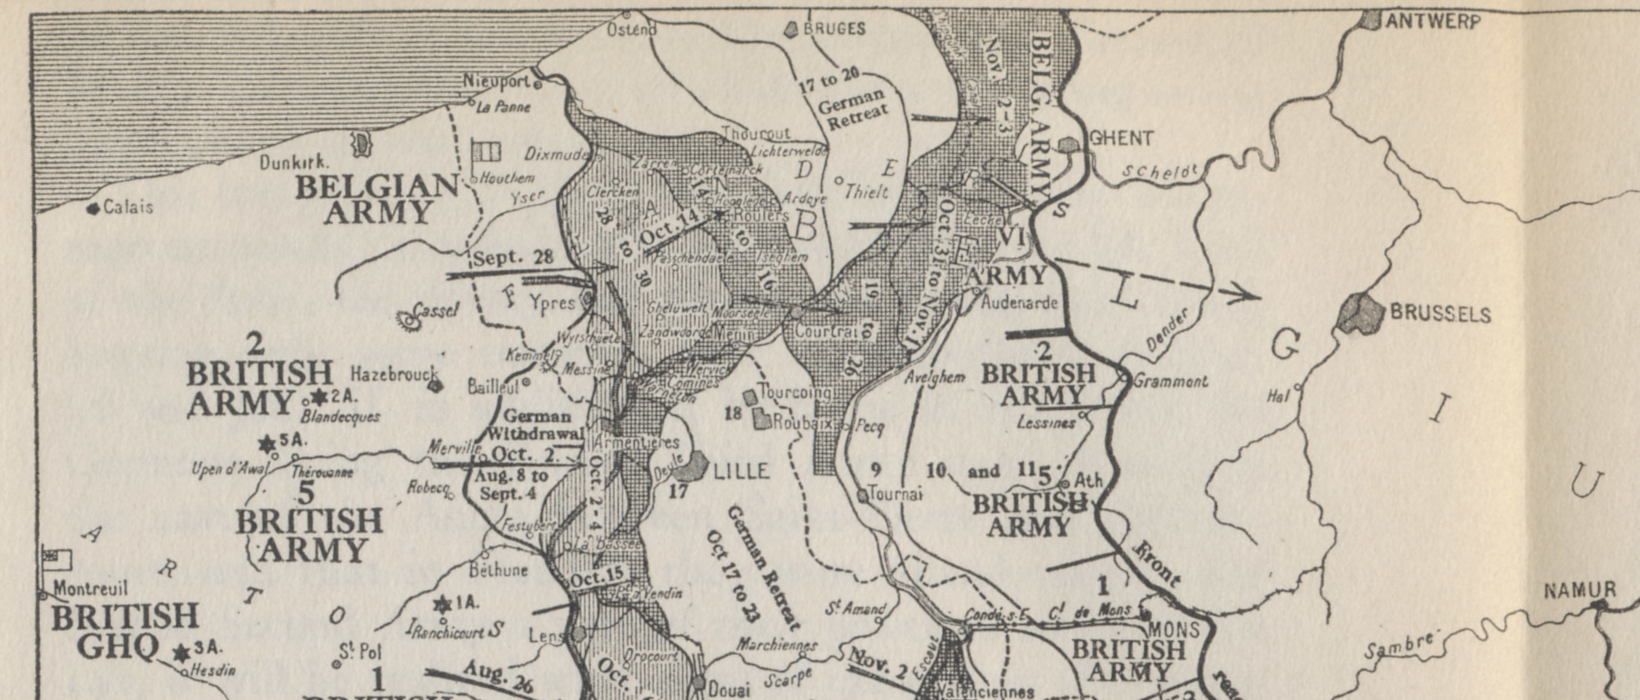 Detail showing the northern, Belgian sector of the Western Front from a map of the Allied offensives of 1918, from July 18 and the Second Battle of the Marne to the Armistice on November 11. From 'The Memoirs of Marshall Foch' by Marshall Foch.